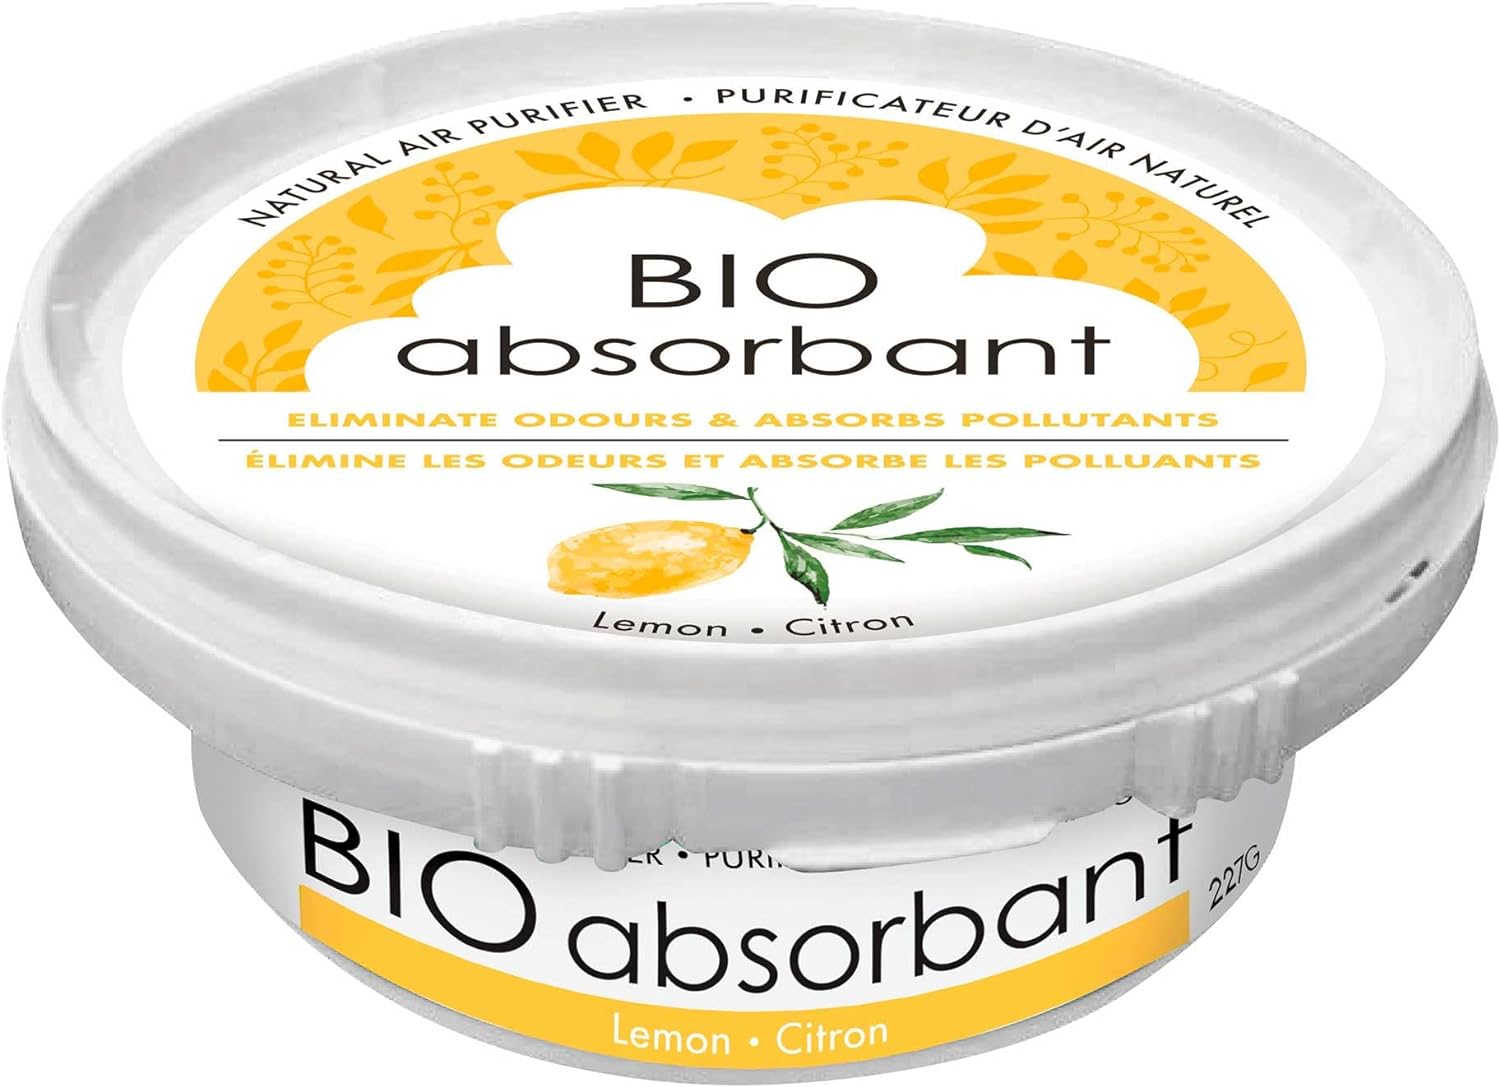 ATTITUDE Bio Absorbant Air Purifier with Activated Carbon, Plant- and Mineral-Based, Absorbs Odors, Vegan, Lemon, 8 Ounces